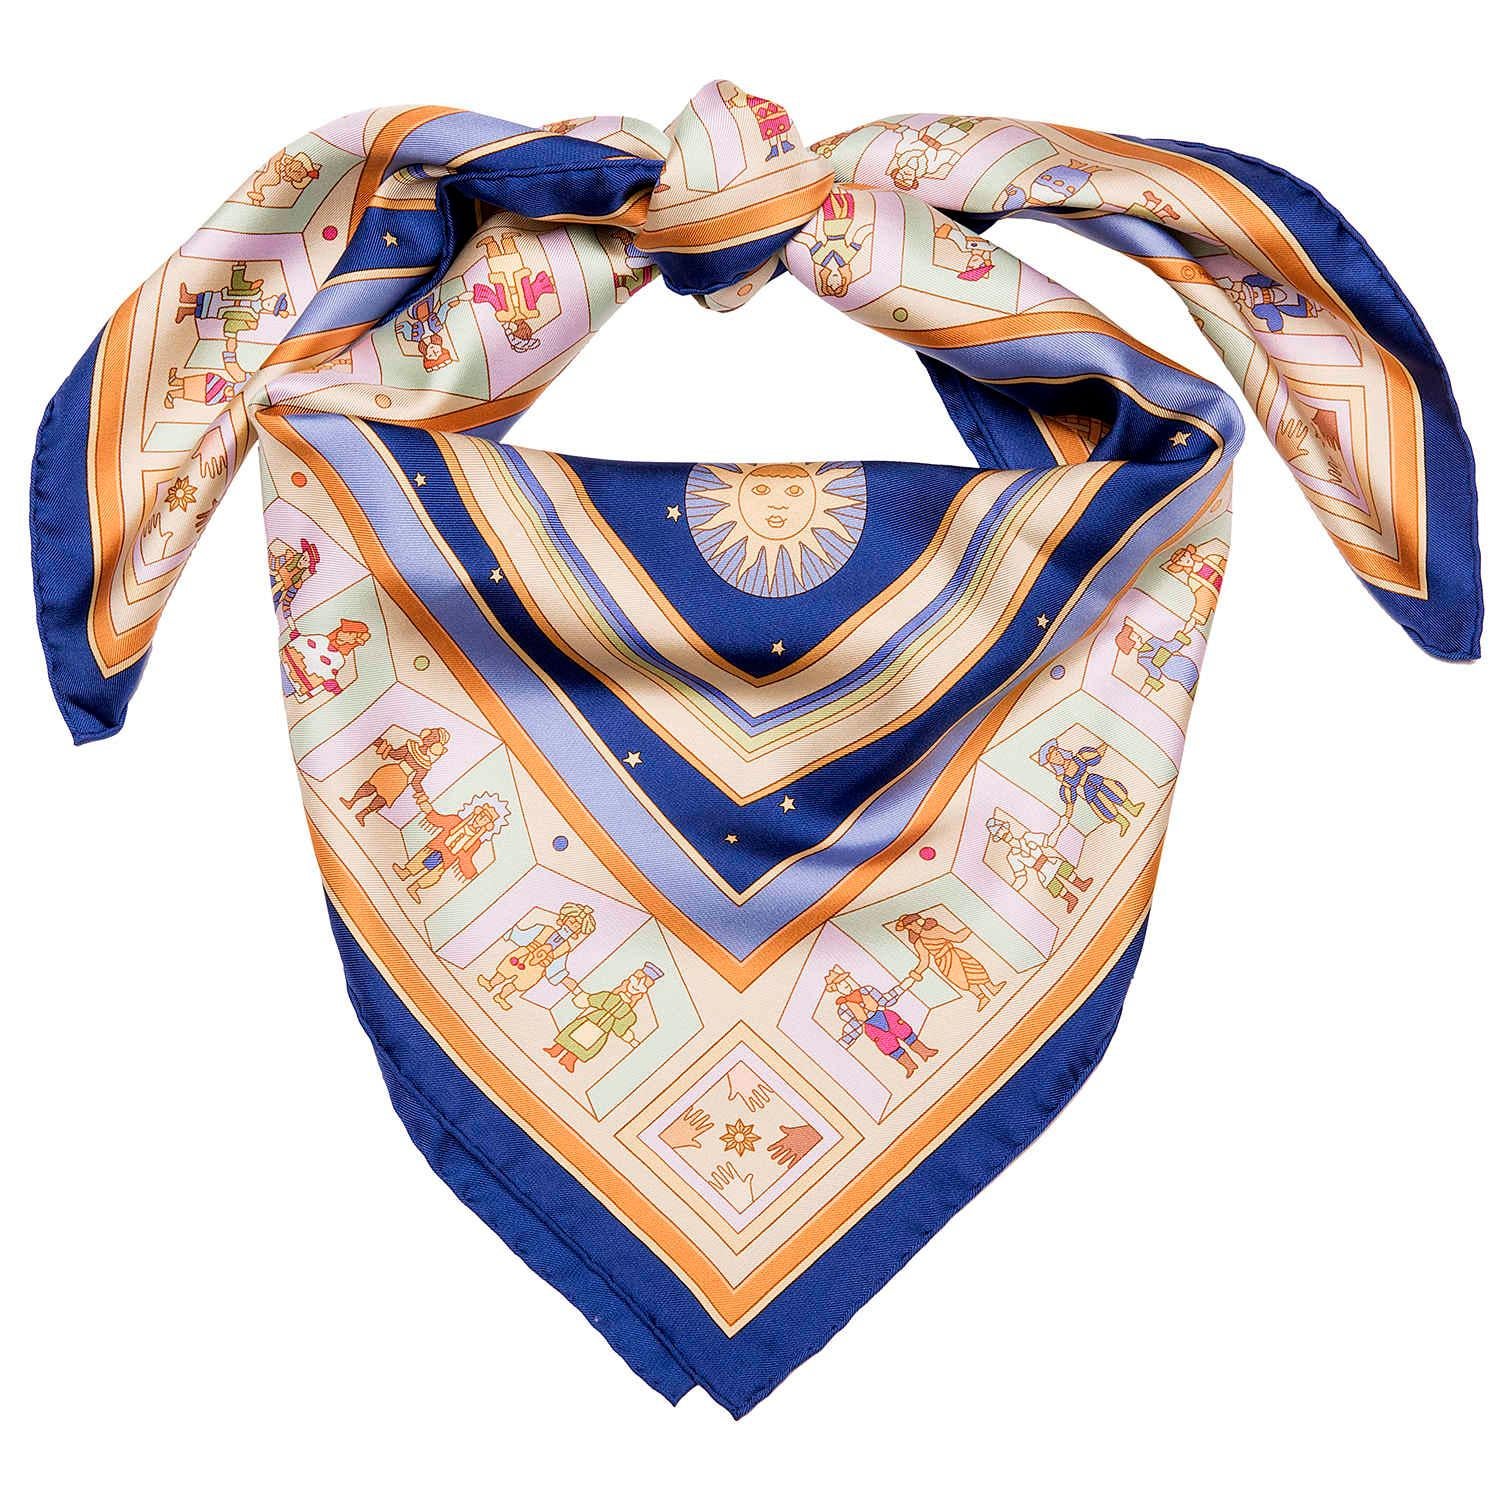 The colour ways of this beautiful Hermes Silk Scarf will complement lots of different outfits. 'Donner la main' by Karen Petrossian, one of Hermes favourite designers, is in pristine condition and originally designed in 2002.
